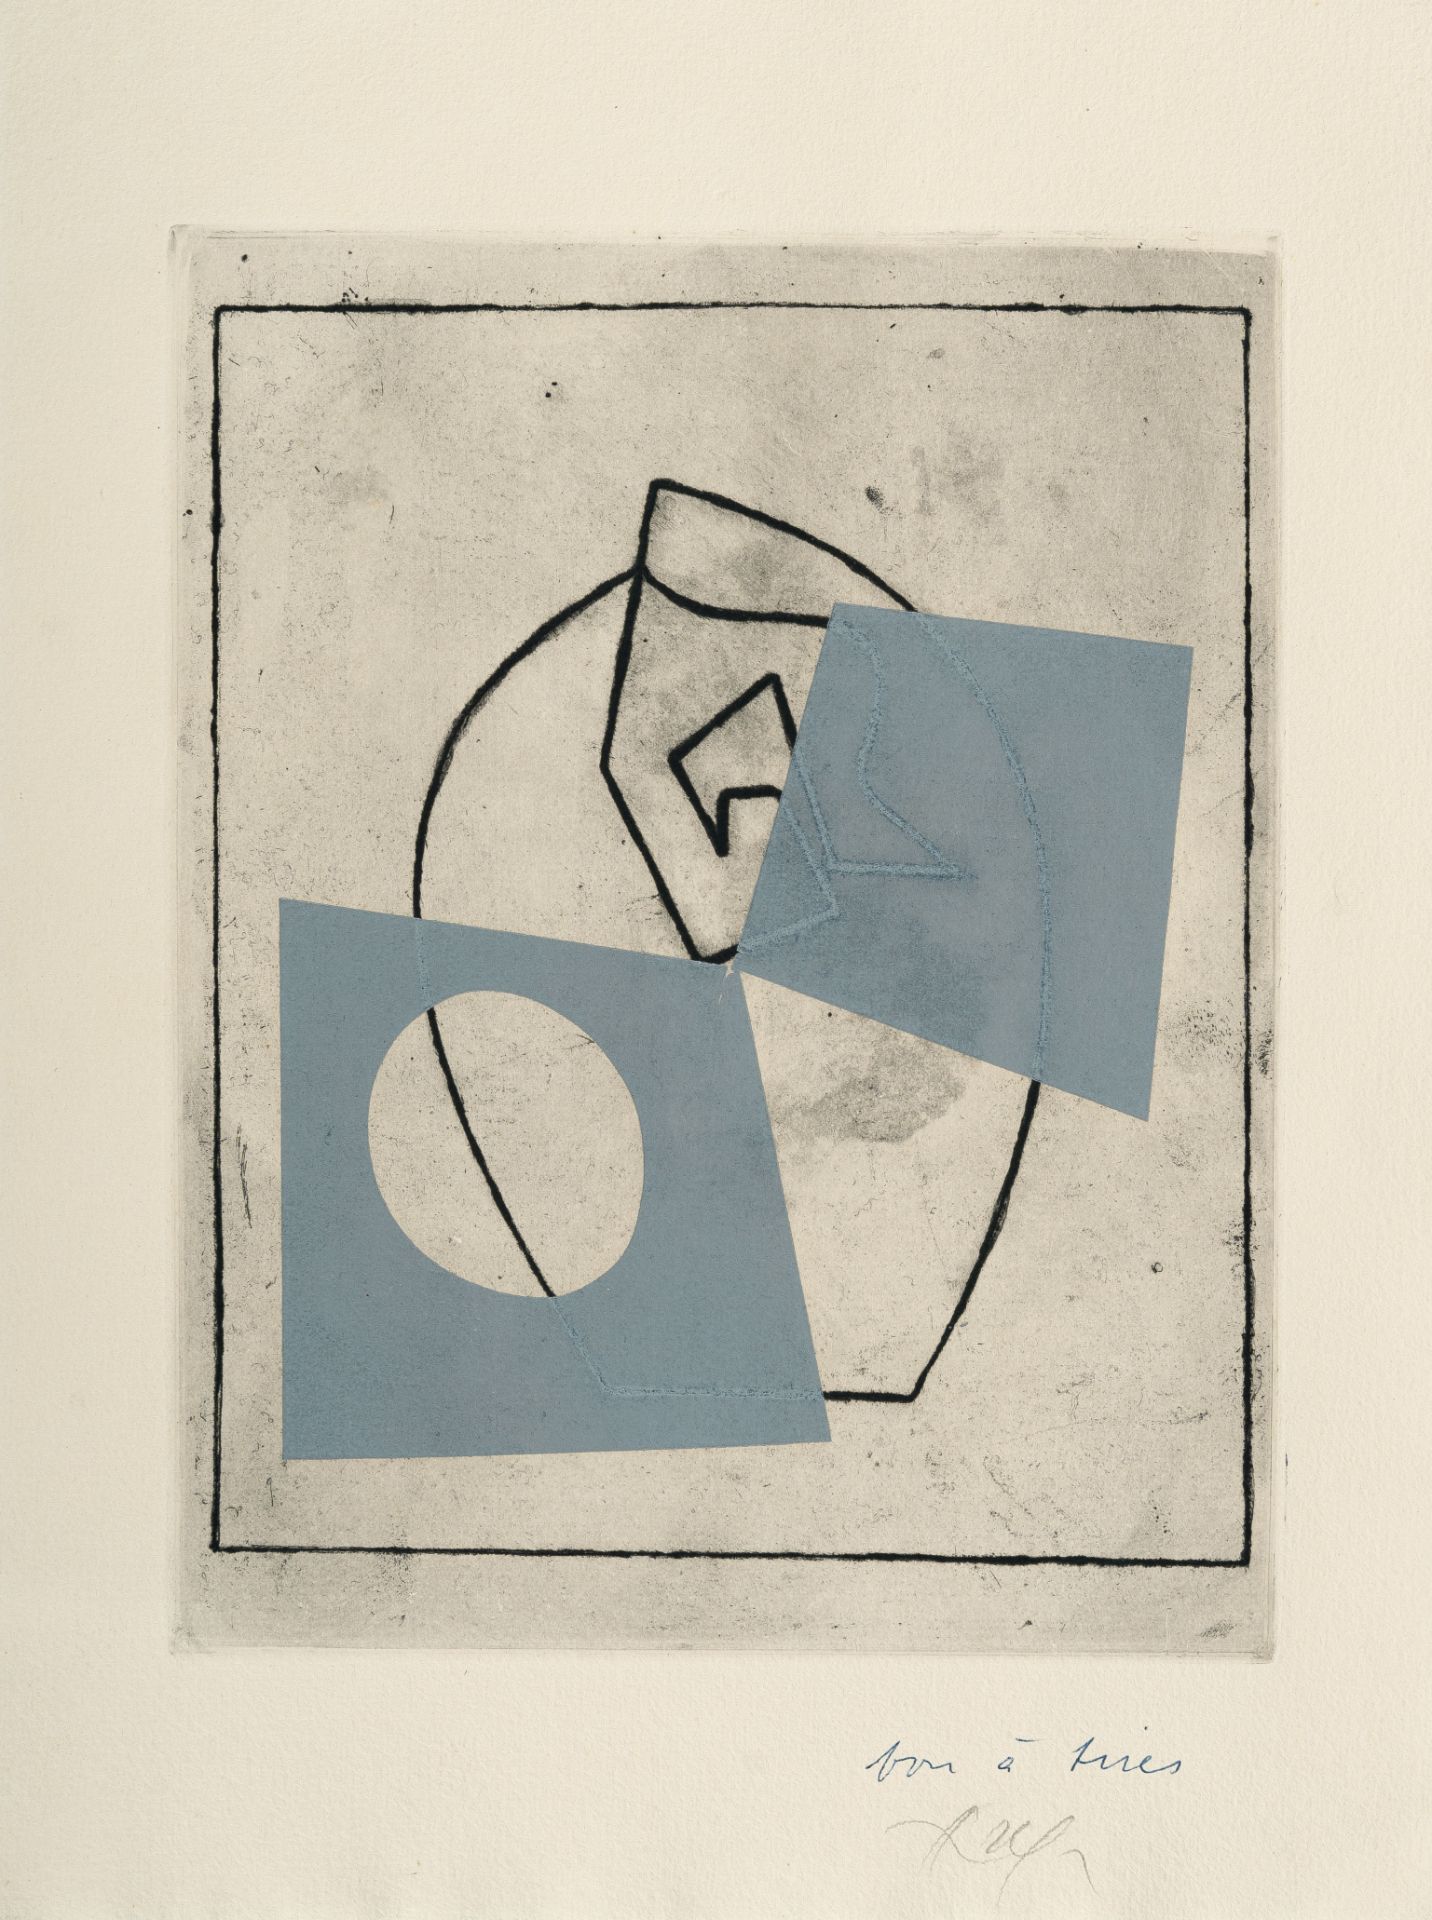 Hans Arp, La cathédrale est un cœur.Etching with over-printing of a woodcut in grey on firm